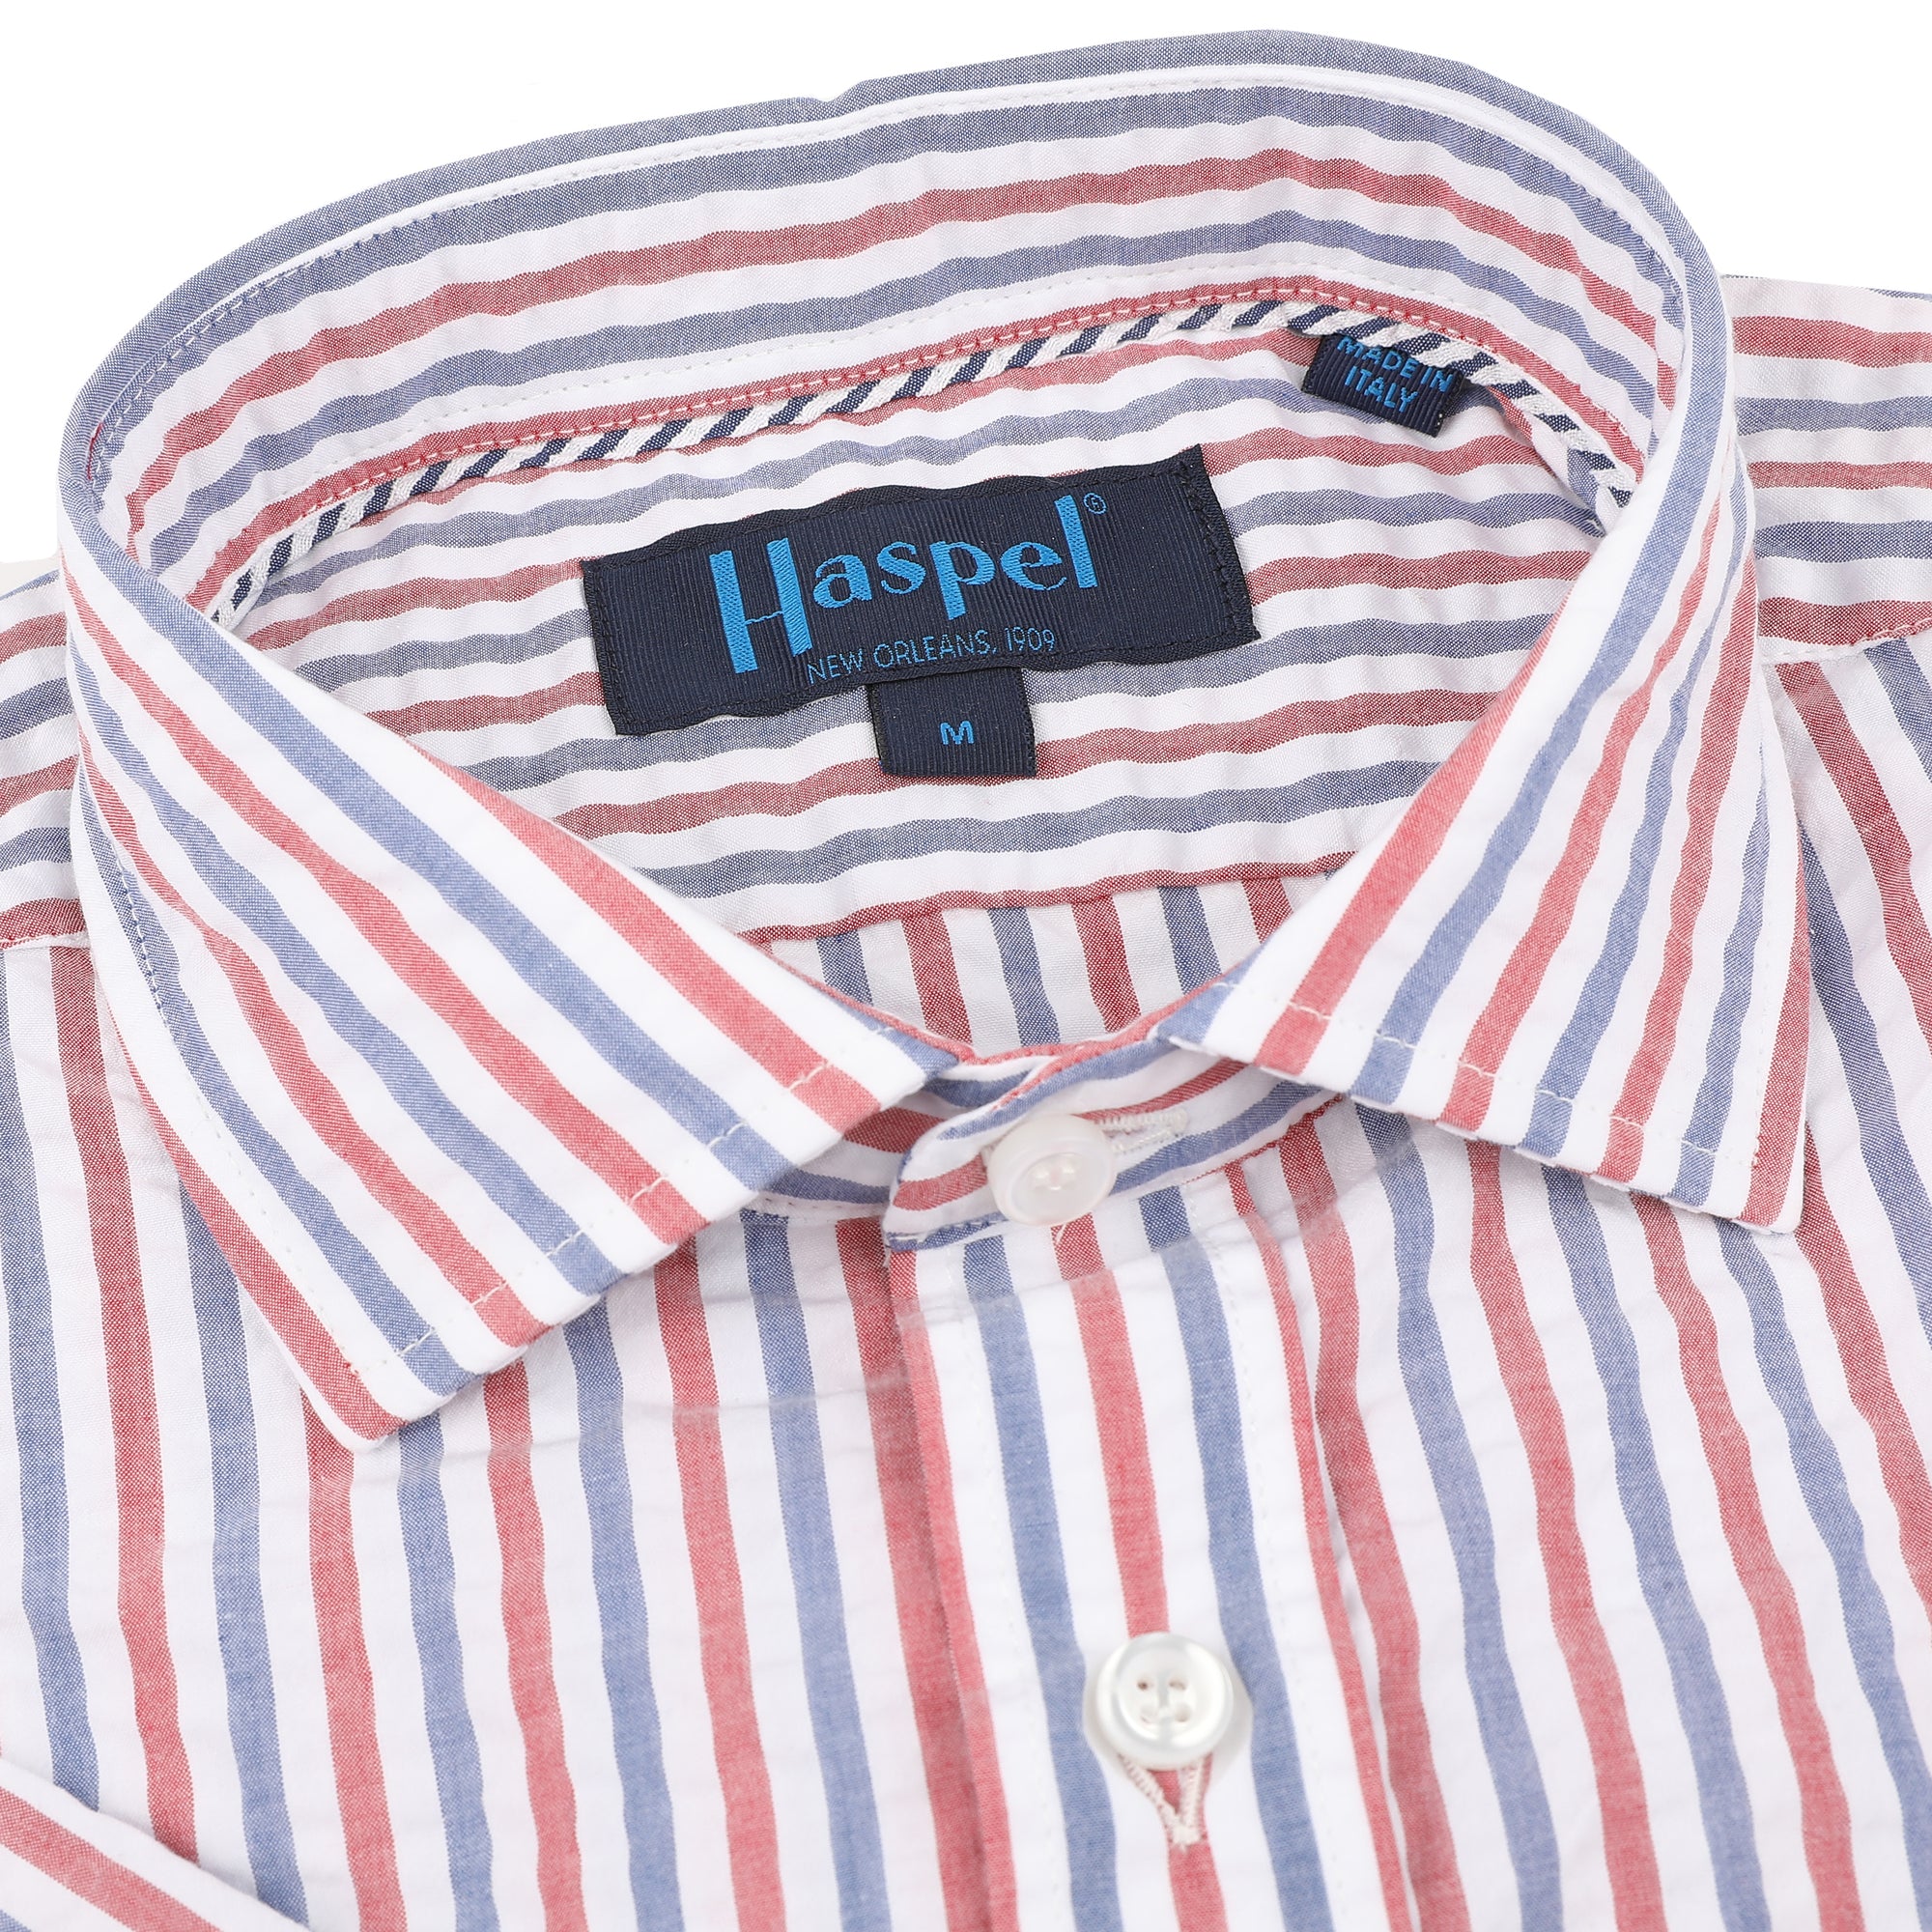 Add some seaside flair to your wardrobe with Baonne's Red, White and Blue Seersucker Stripe look. The classic casual style is elevated by the playful red and blue stripes, making it a must-have for any occasion.&nbsp;</p> <p>100% Cotton Seersucker • Spread Collar • Long Sleeve • Double Chest Pocket • Machine Washable • Made in Italy